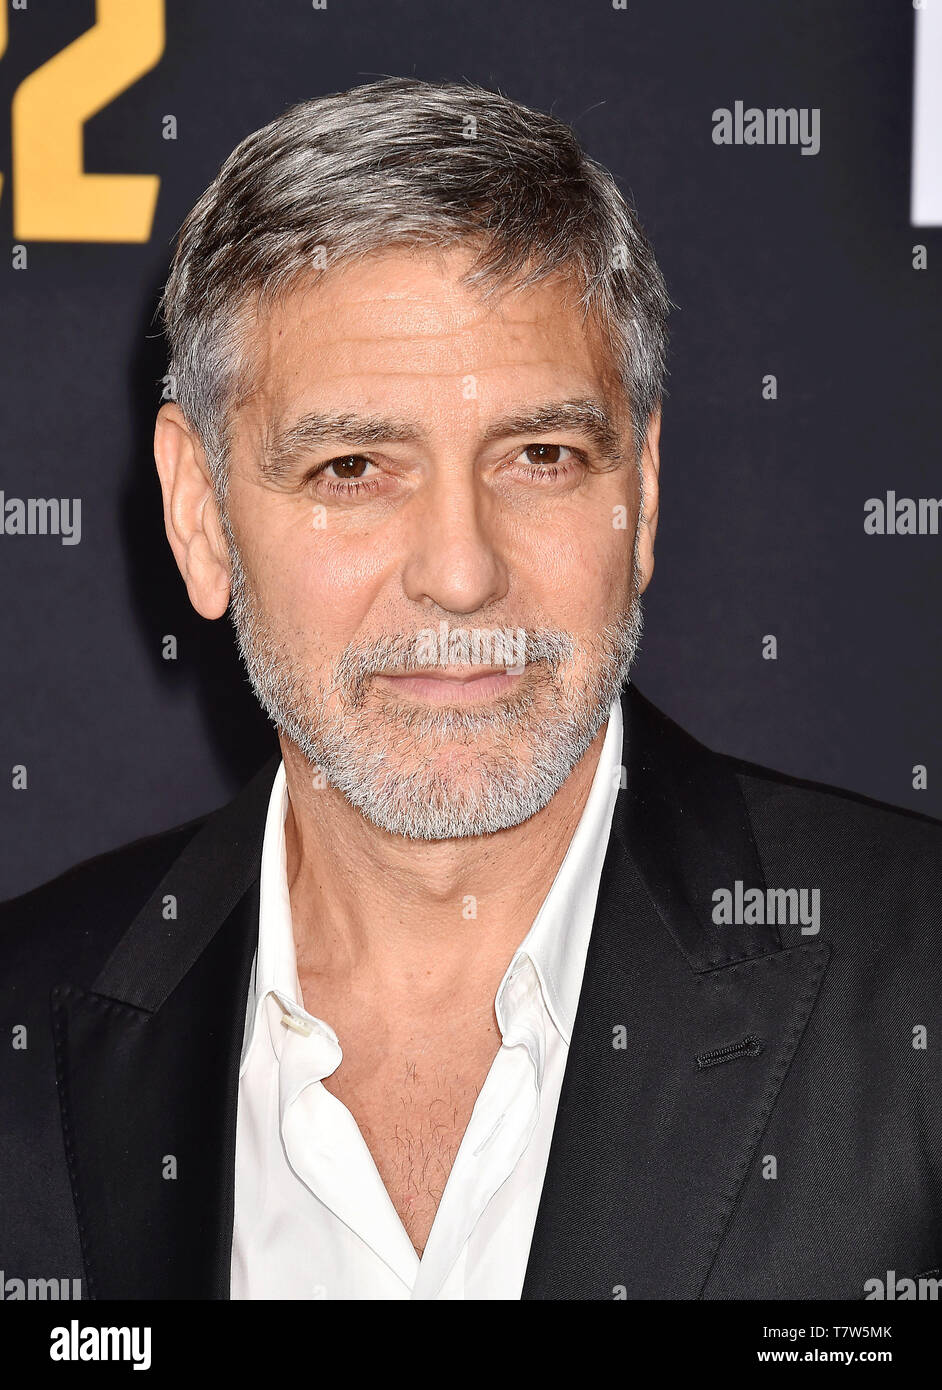 HOLLYWOOD, CA - MAY 07: George Clooney arrives at the U.S. Premiere Of Hulu's 'Catch-22' at TCL Chinese Theatre on May 07, 2019 in Hollywood, California. Stock Photo